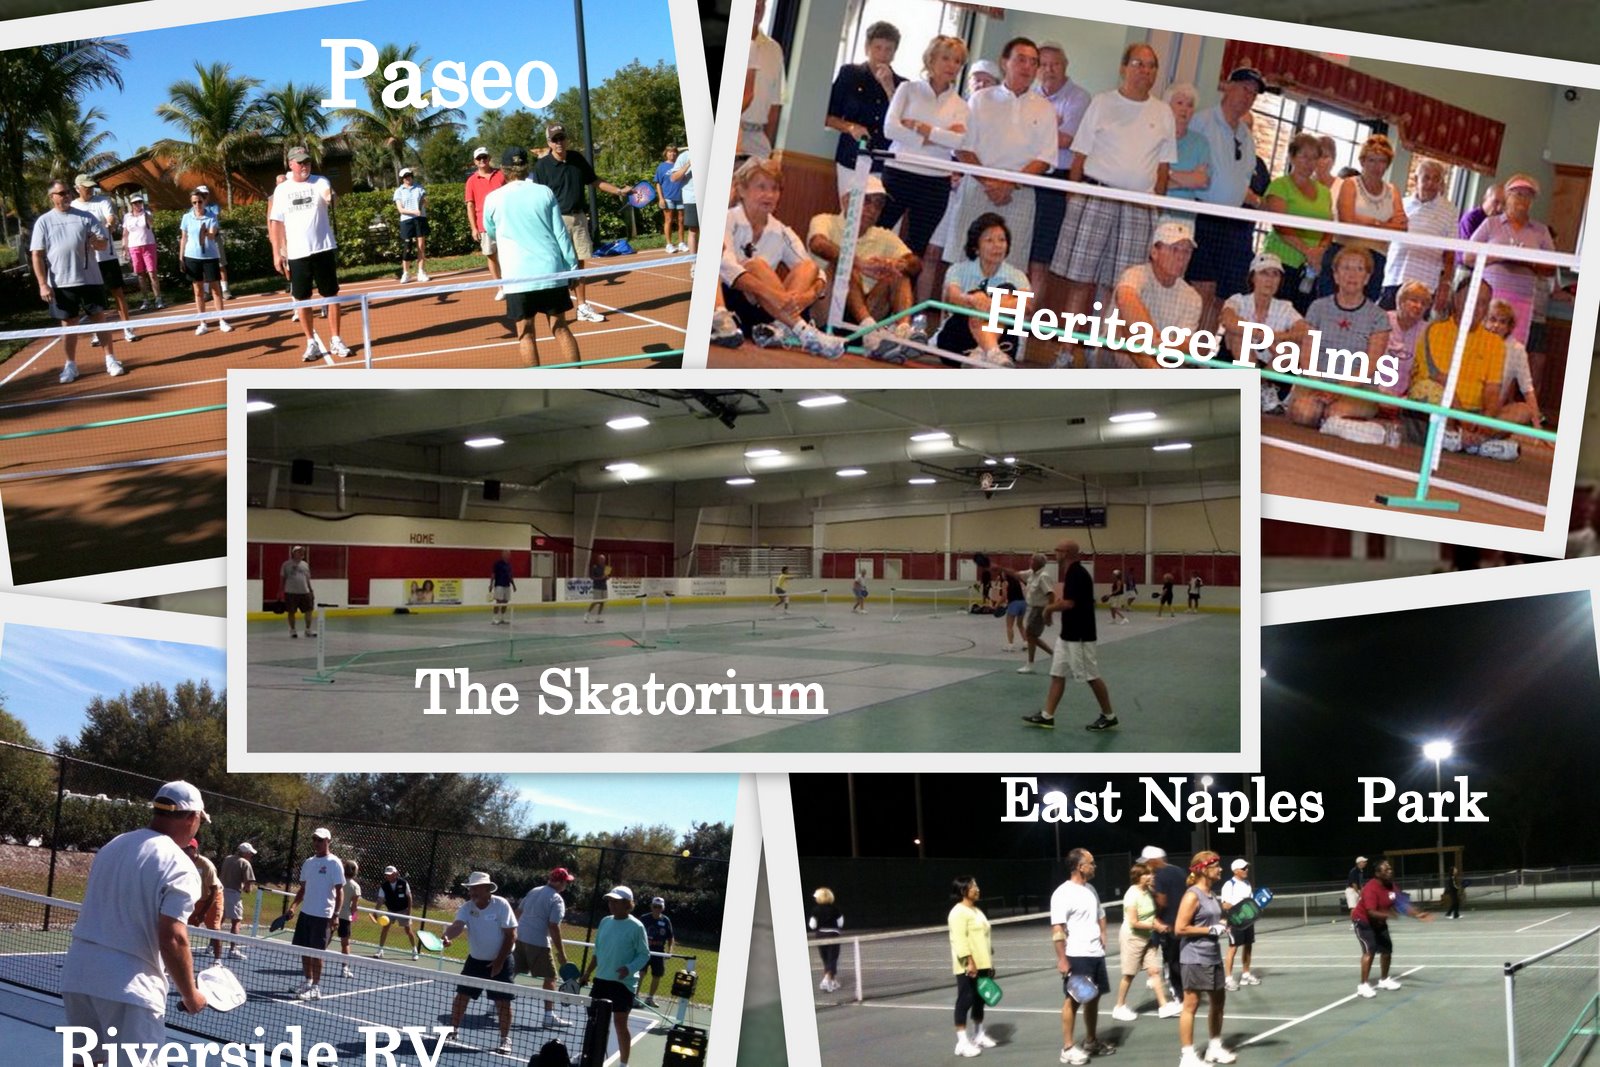 ... East Naples Community Park, and The Skatium in downtown Ft. Myers